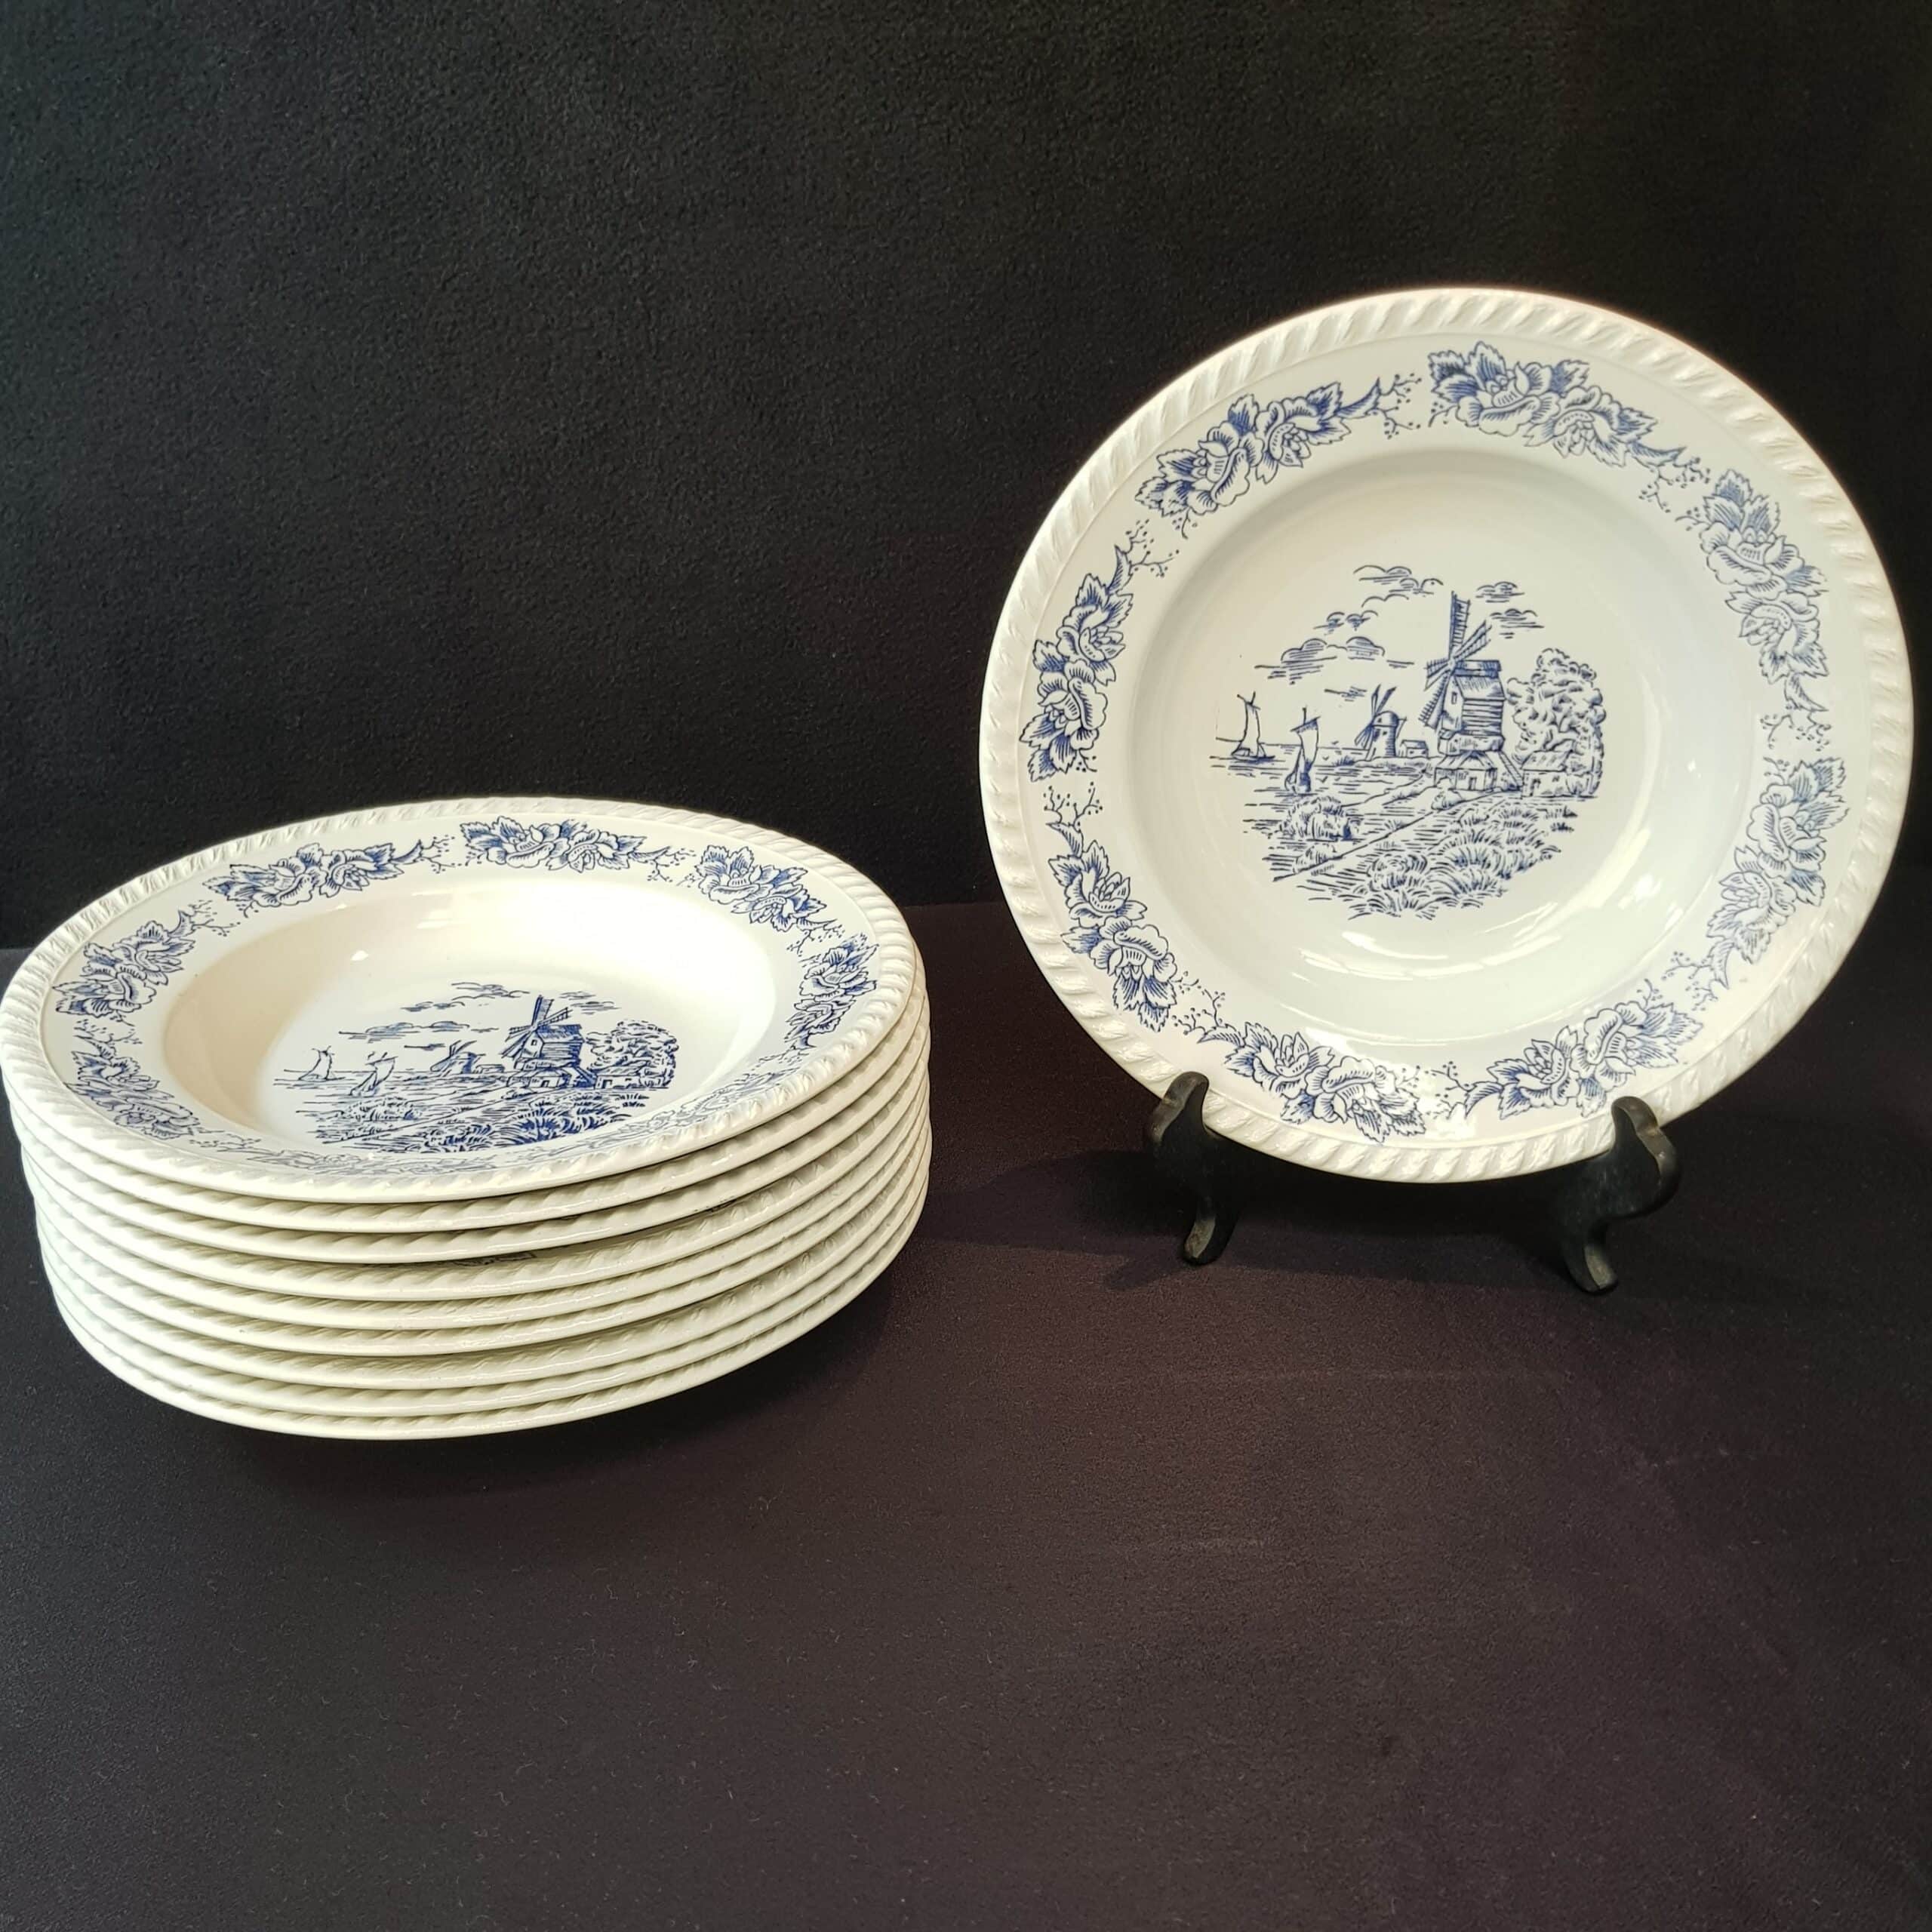 assiettes creuses faience blanches bleues brocante occasion seconde main scaled